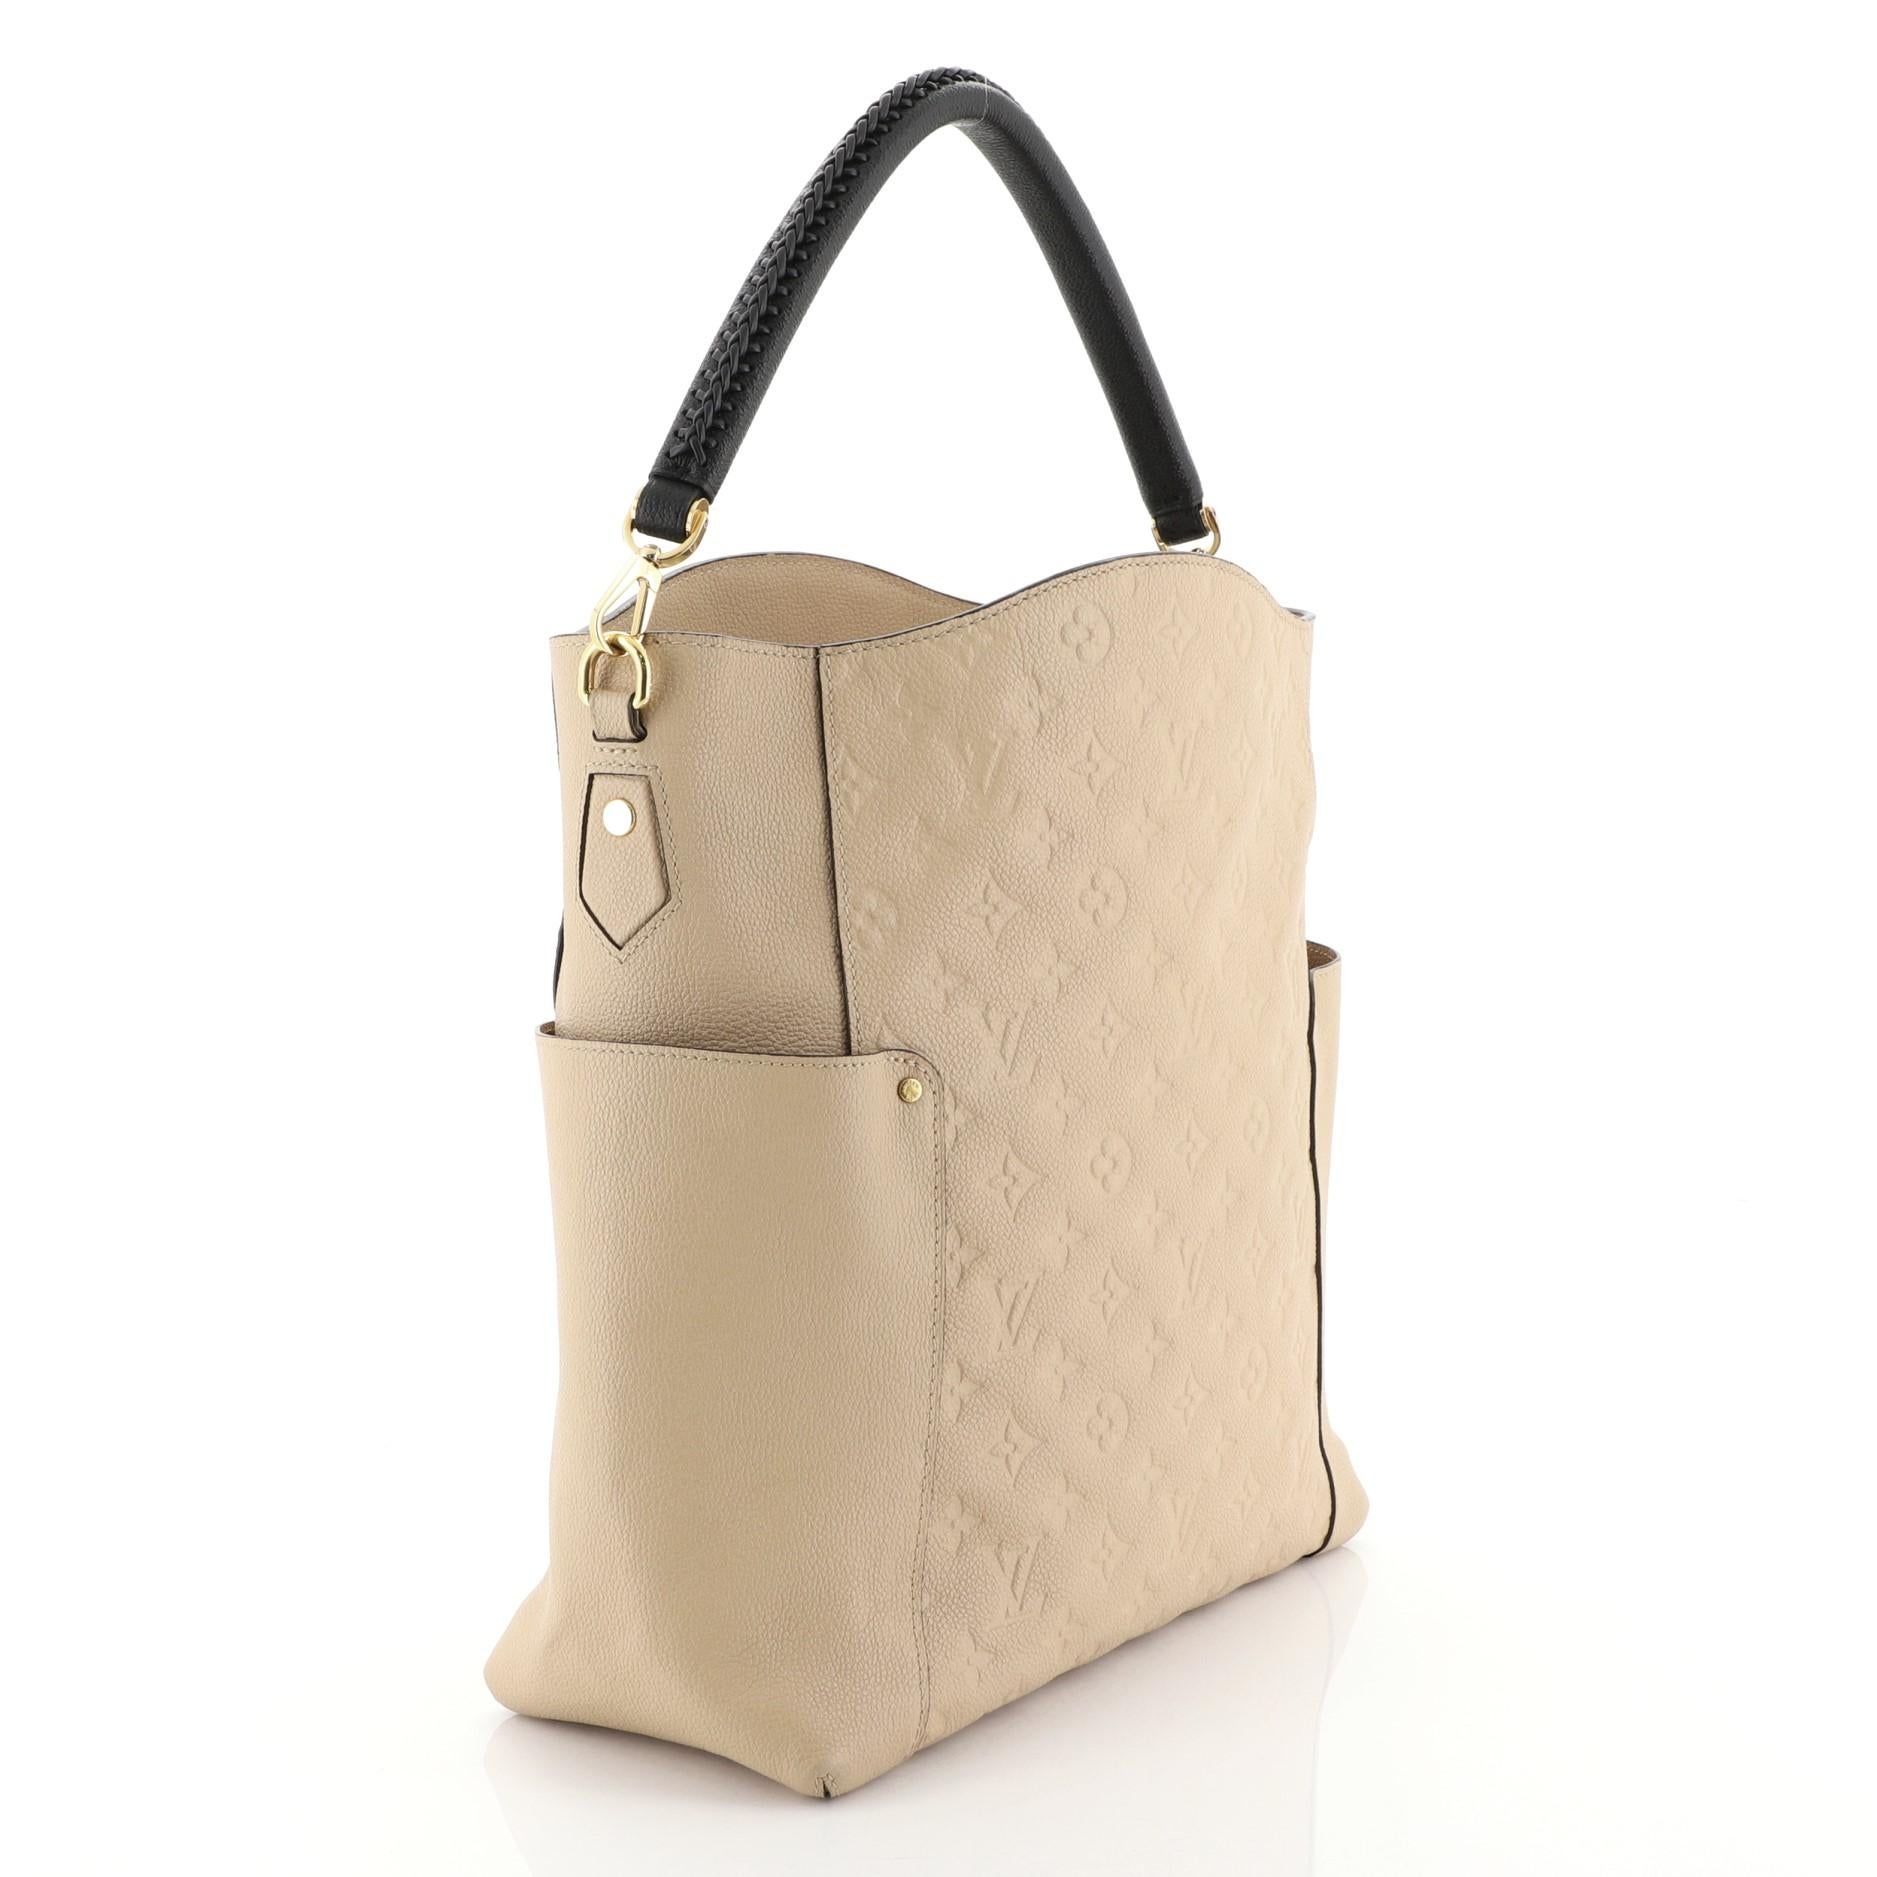 This Louis Vuitton Bagatelle Hobo Monogram Empreinte Leather, crafted from neutral monogram empreinte leather, features a braided handle, exterior flat pockets on each side, and gold-tone hardware. Its wide open top showcases a neutral fabric